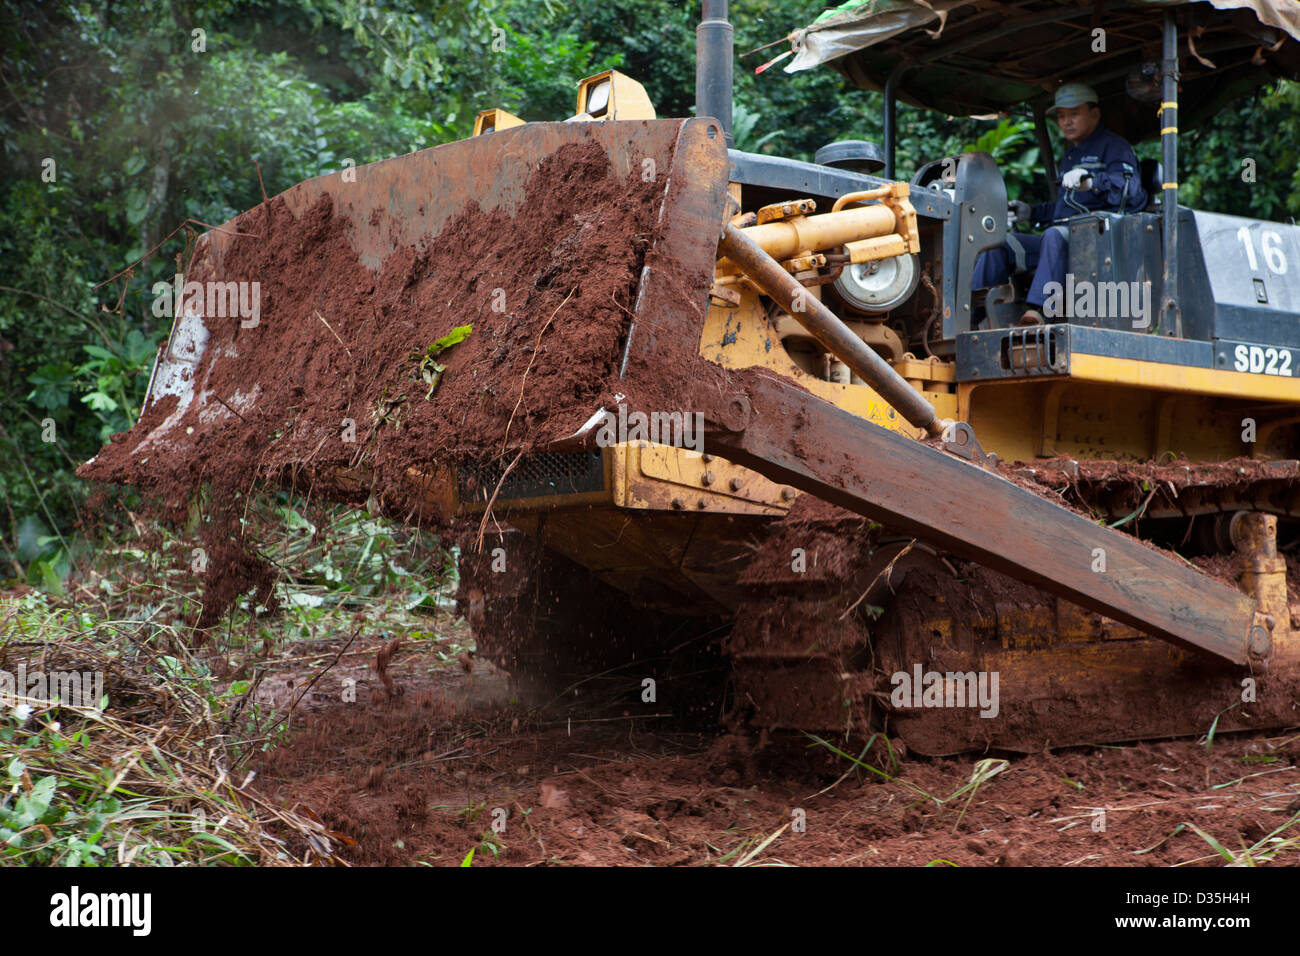 CONGO, 27th Sept 2012: A Chinese bulldozer driver from company Sinohydro cuts a path through the forest for a major new tarmac road. Stock Photo